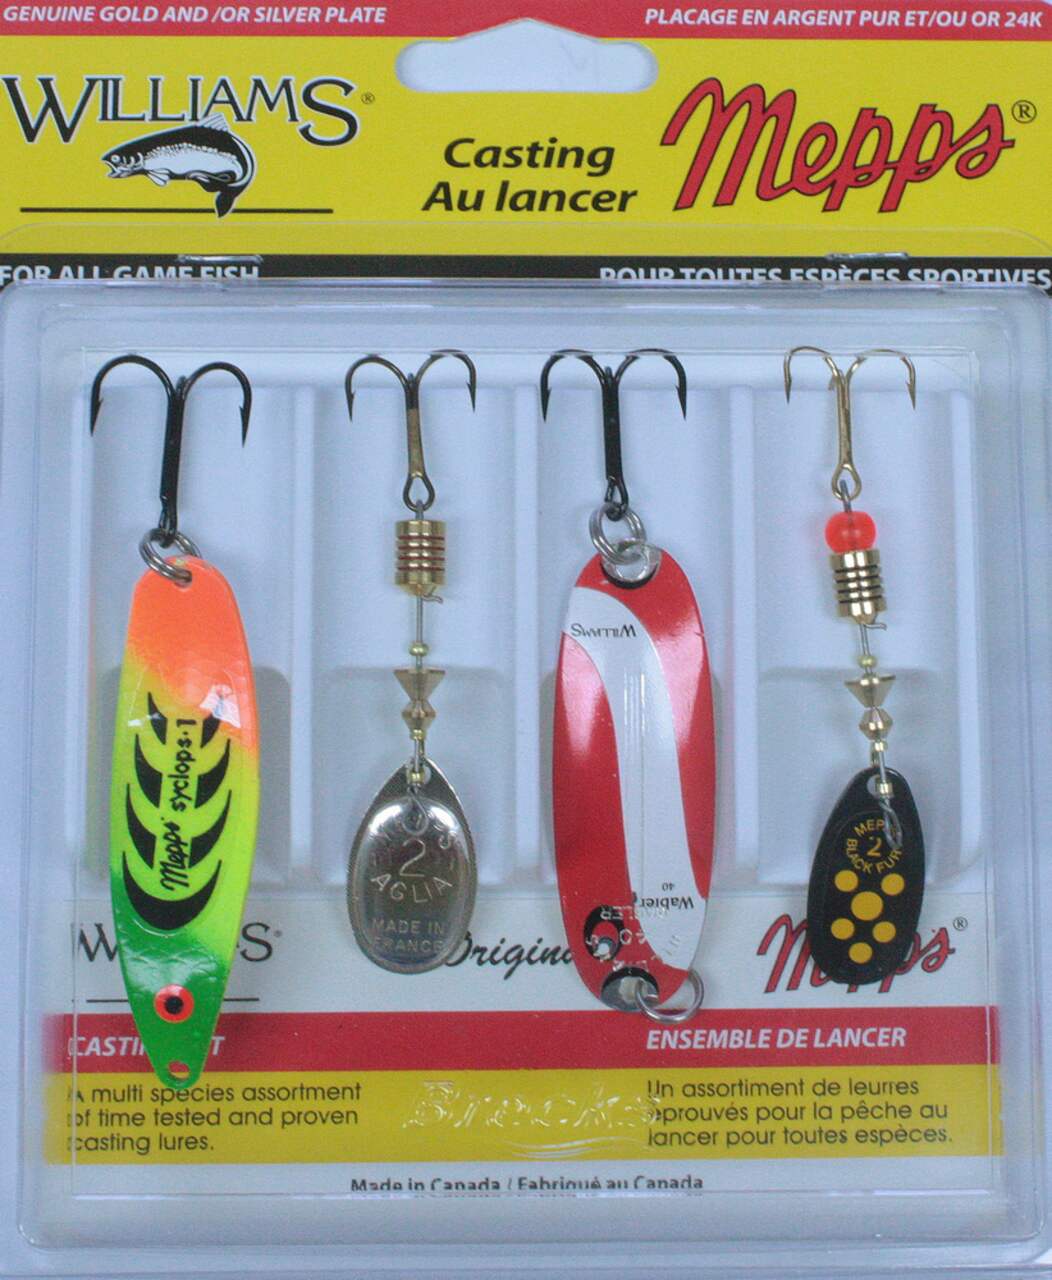 Williams and Mepps Casting Lure Kit, 4-pk